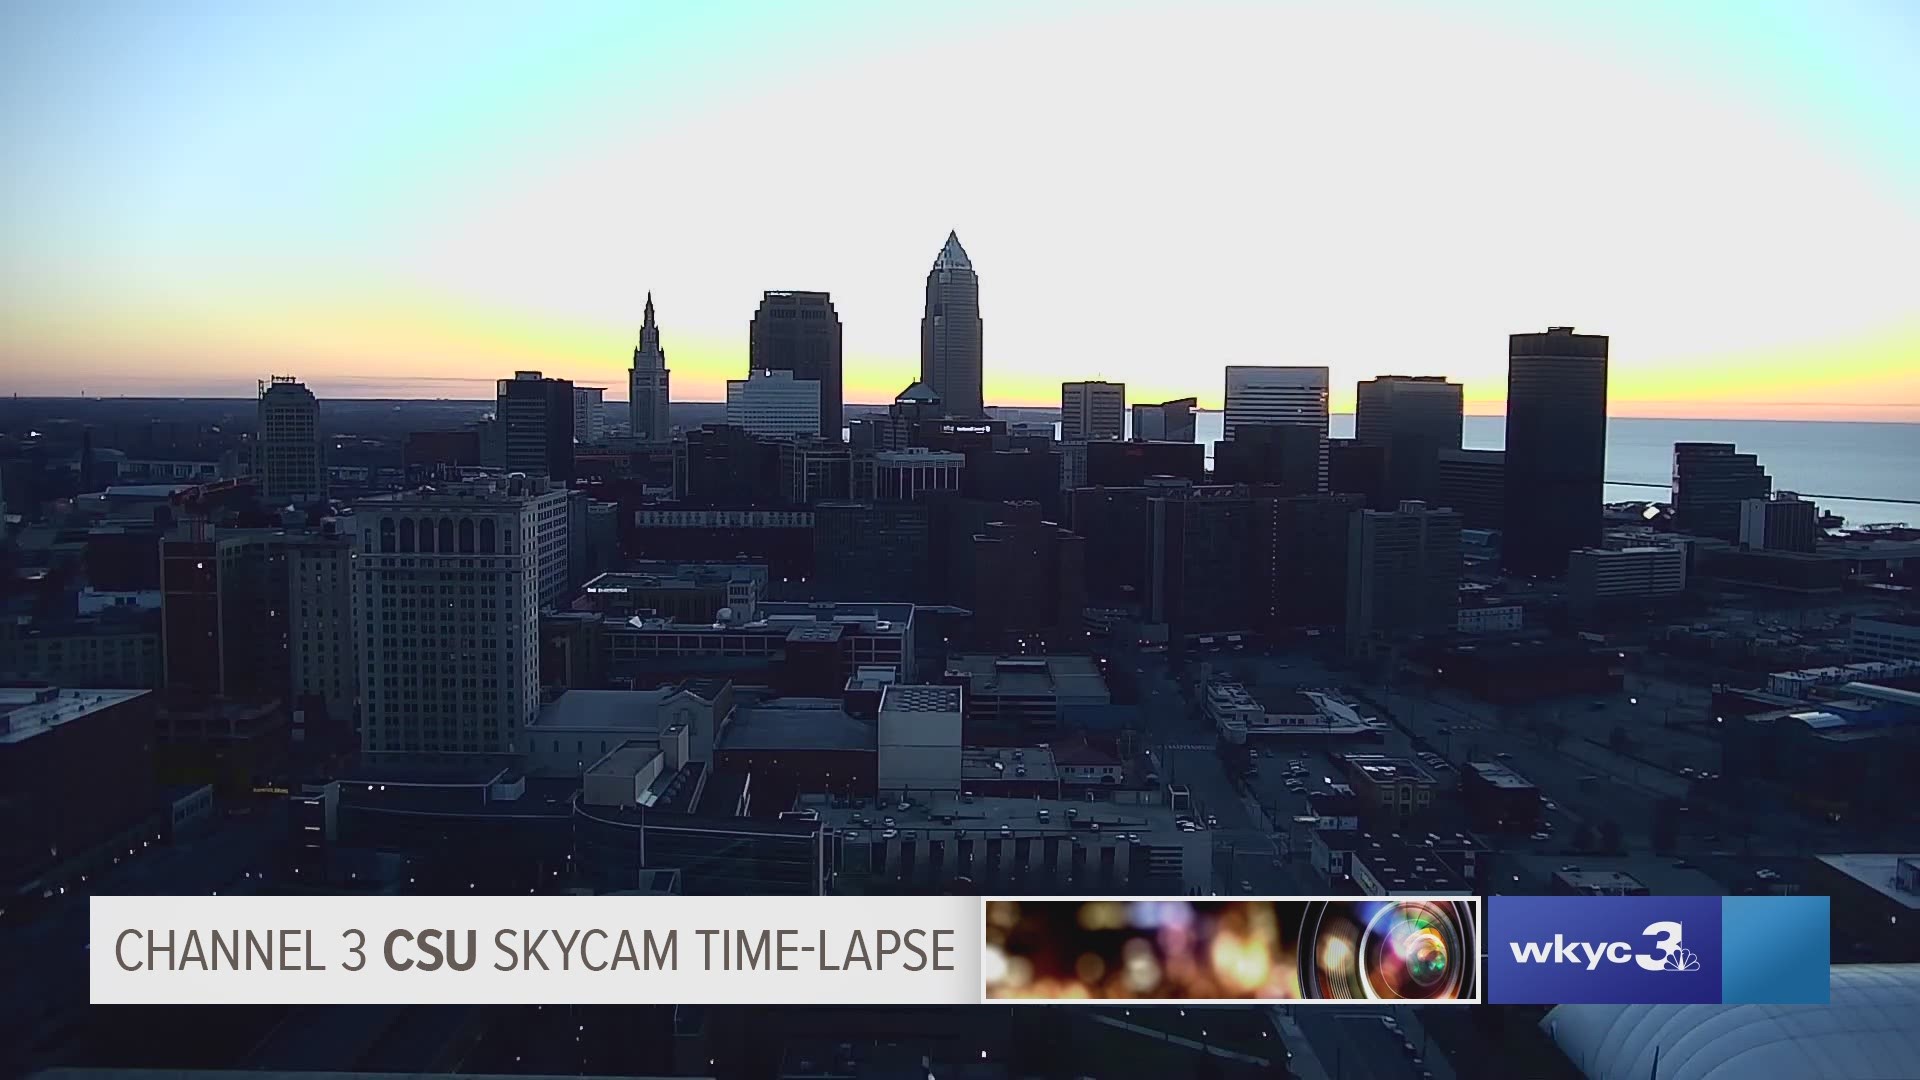 Another sunset beauty tonight in the CLE from our Channel 3 CSU Skycam. Note: the sun is gradually moving further north in the western sky with each sunset. #3weather